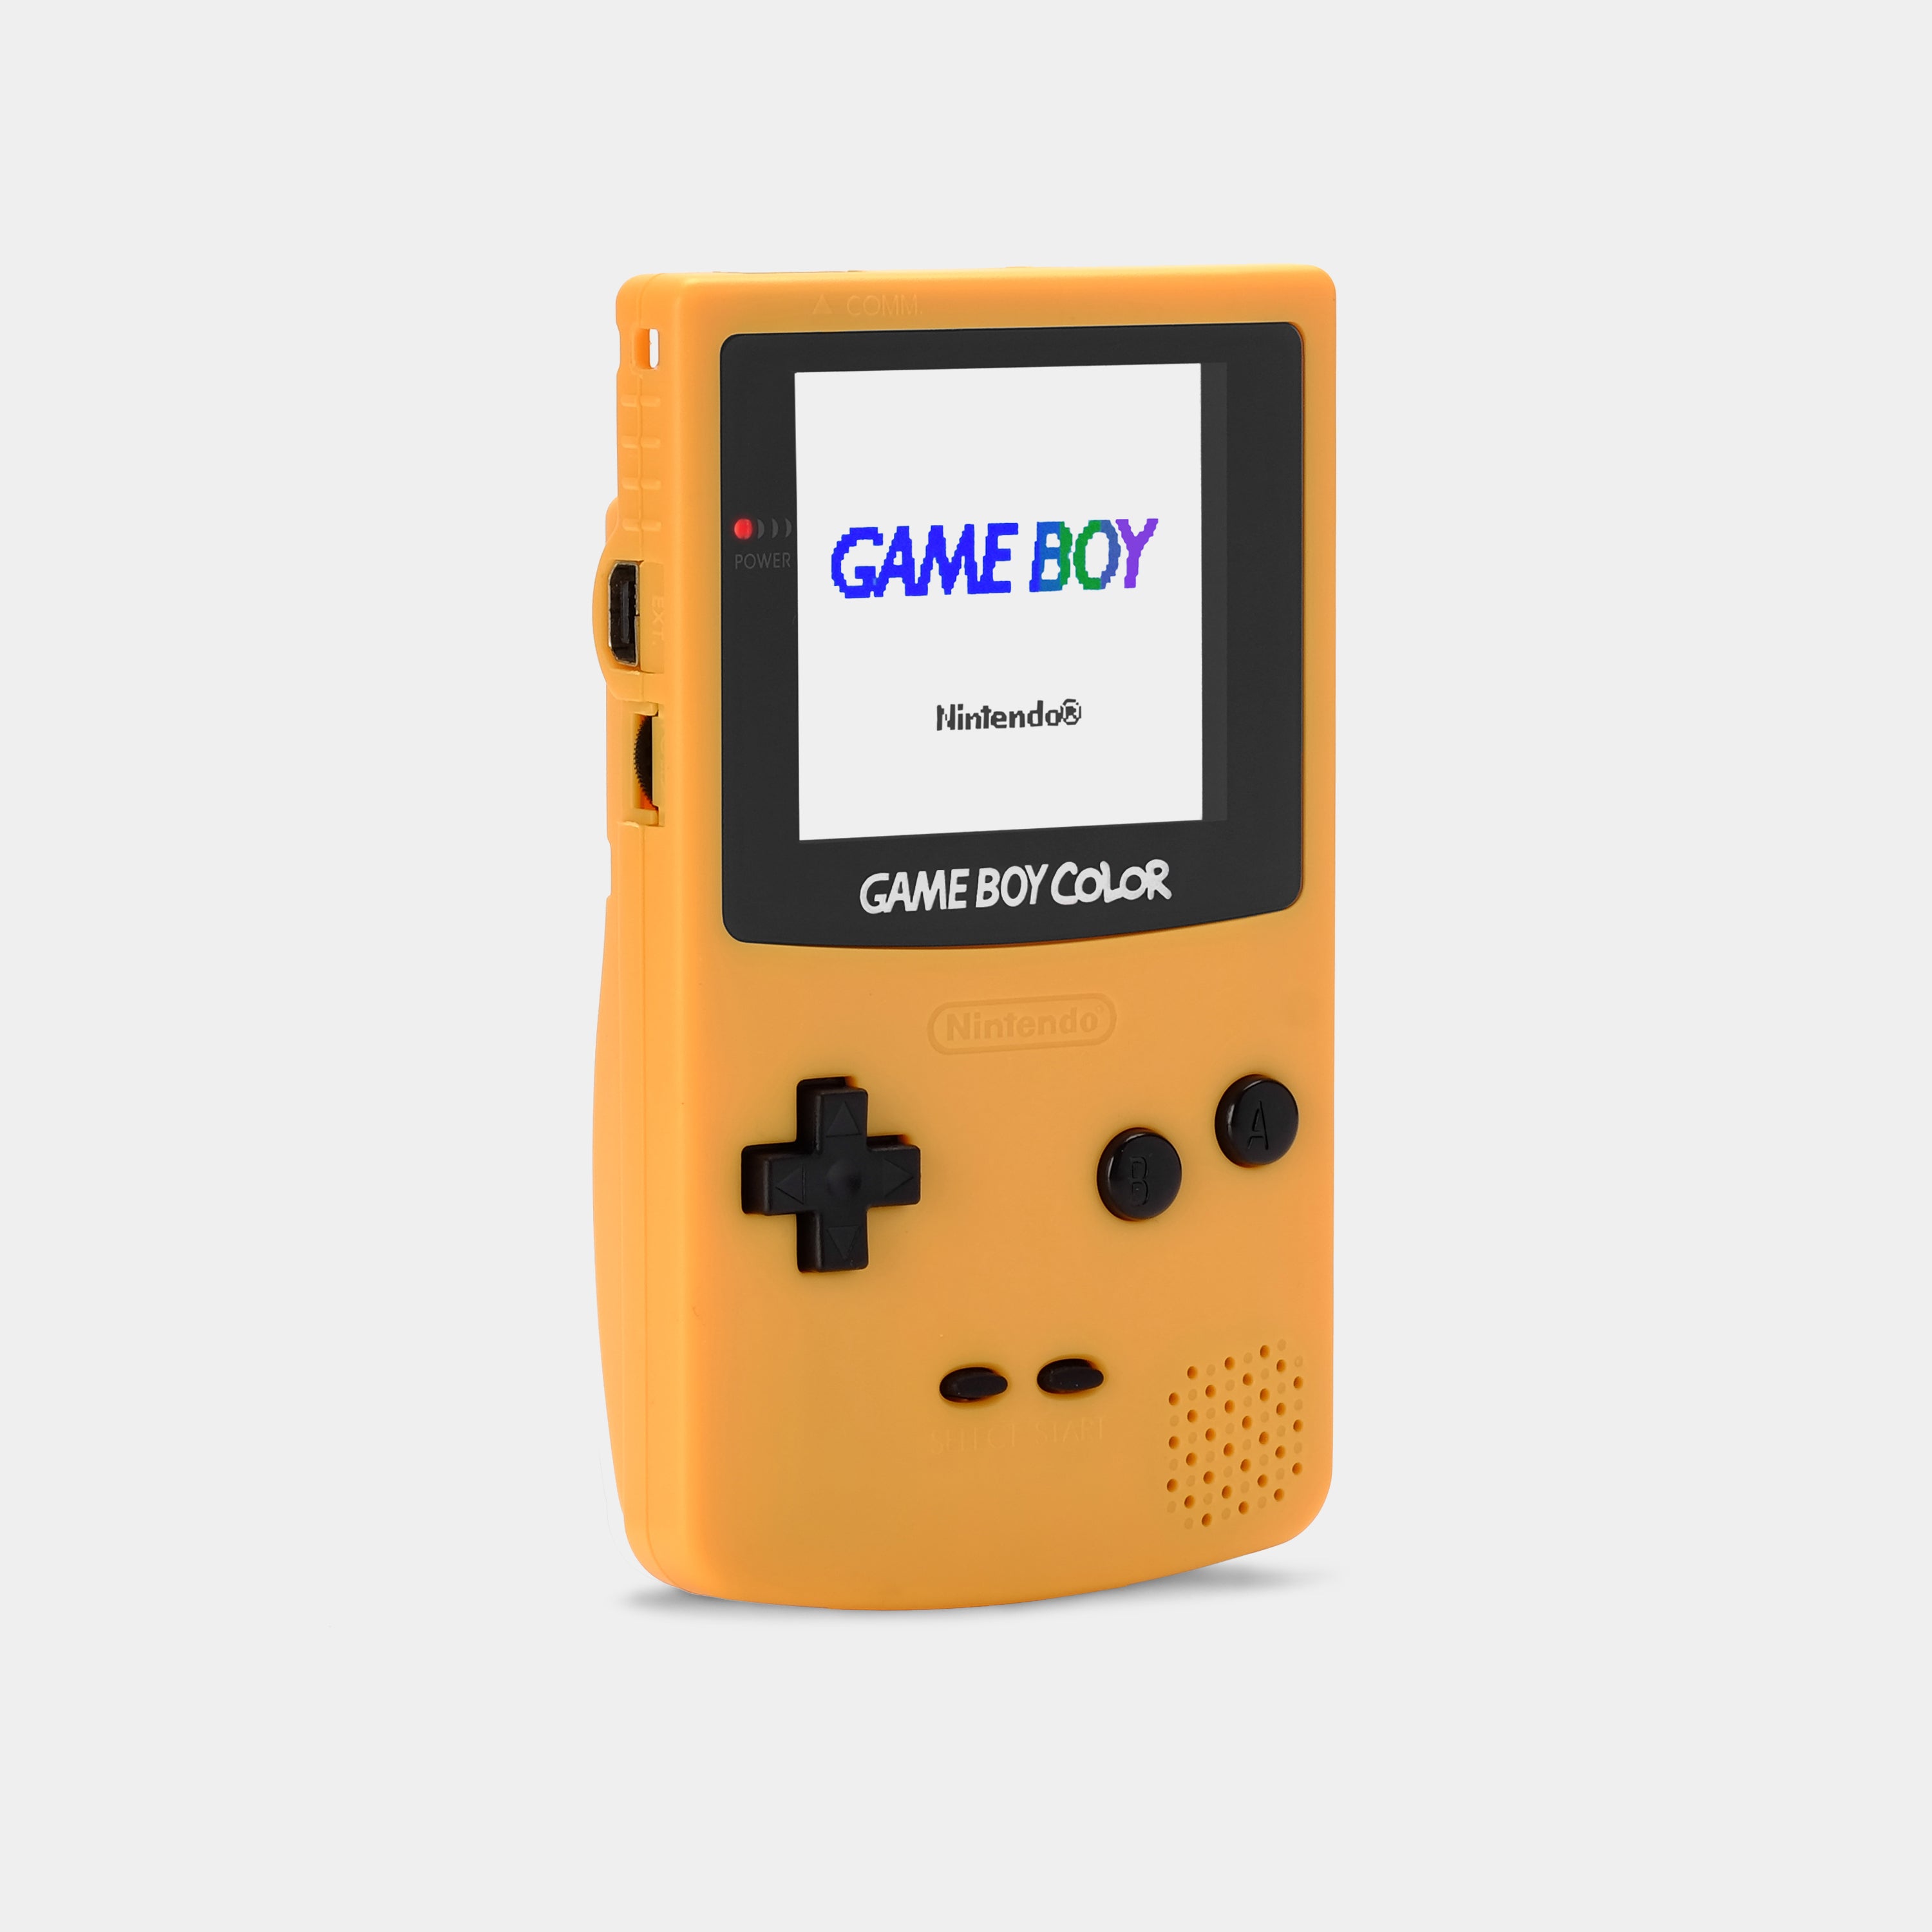 25 years of the Game Boy: A timeline of the systems, accessories